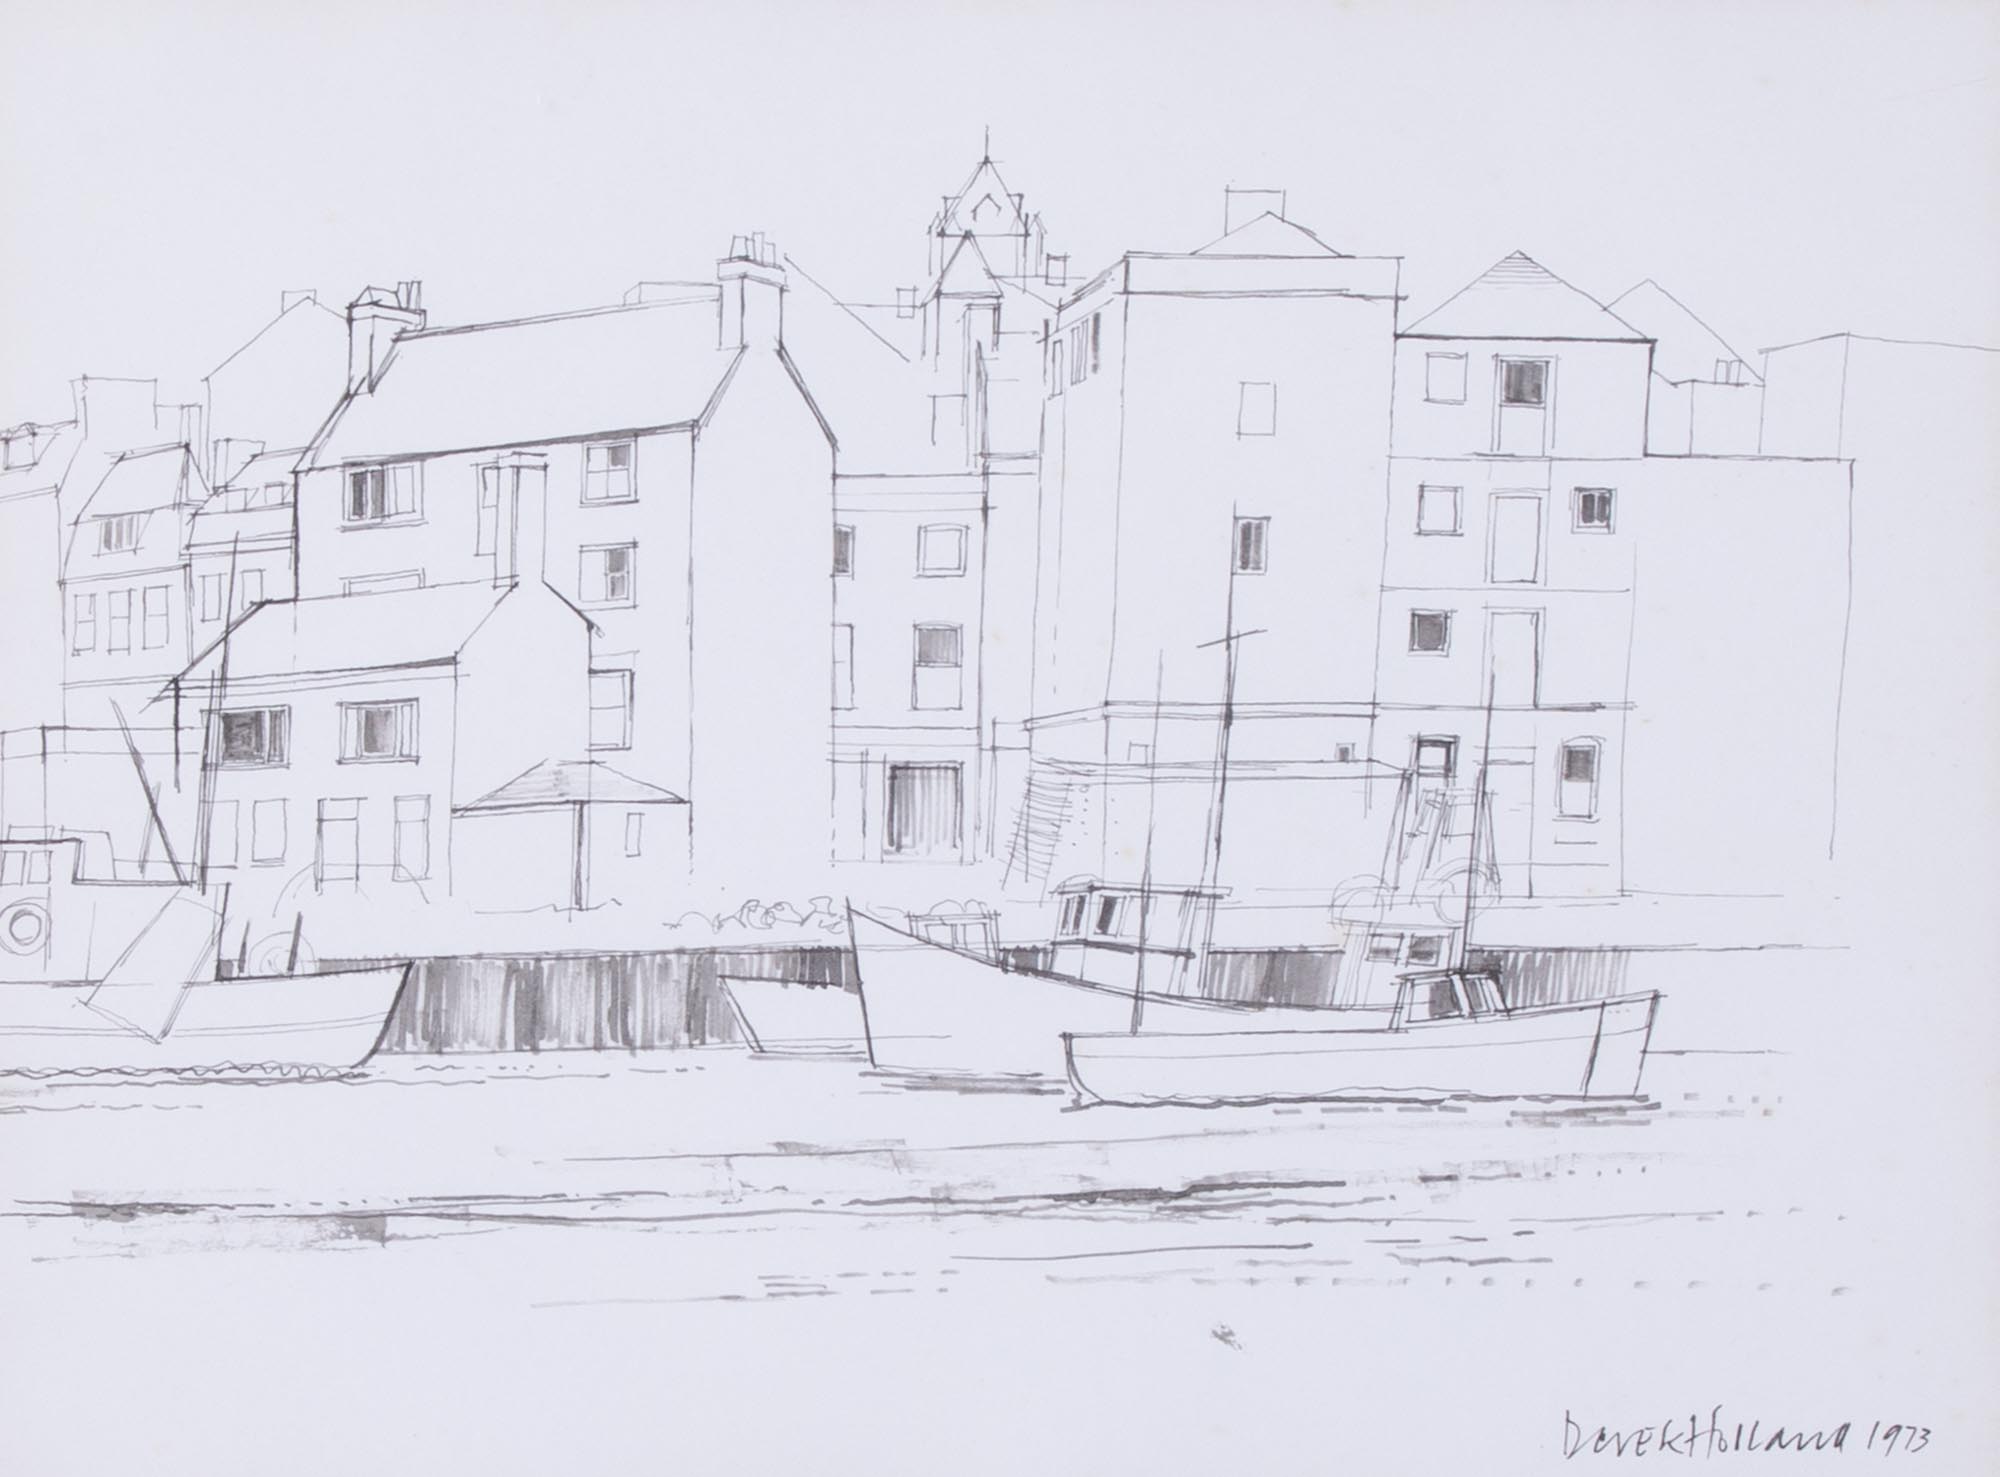 Derek Holland, 'Fishing boats tied up at the Barbican' pen drawing, signed and dated 1973, 24cm x - Image 2 of 2